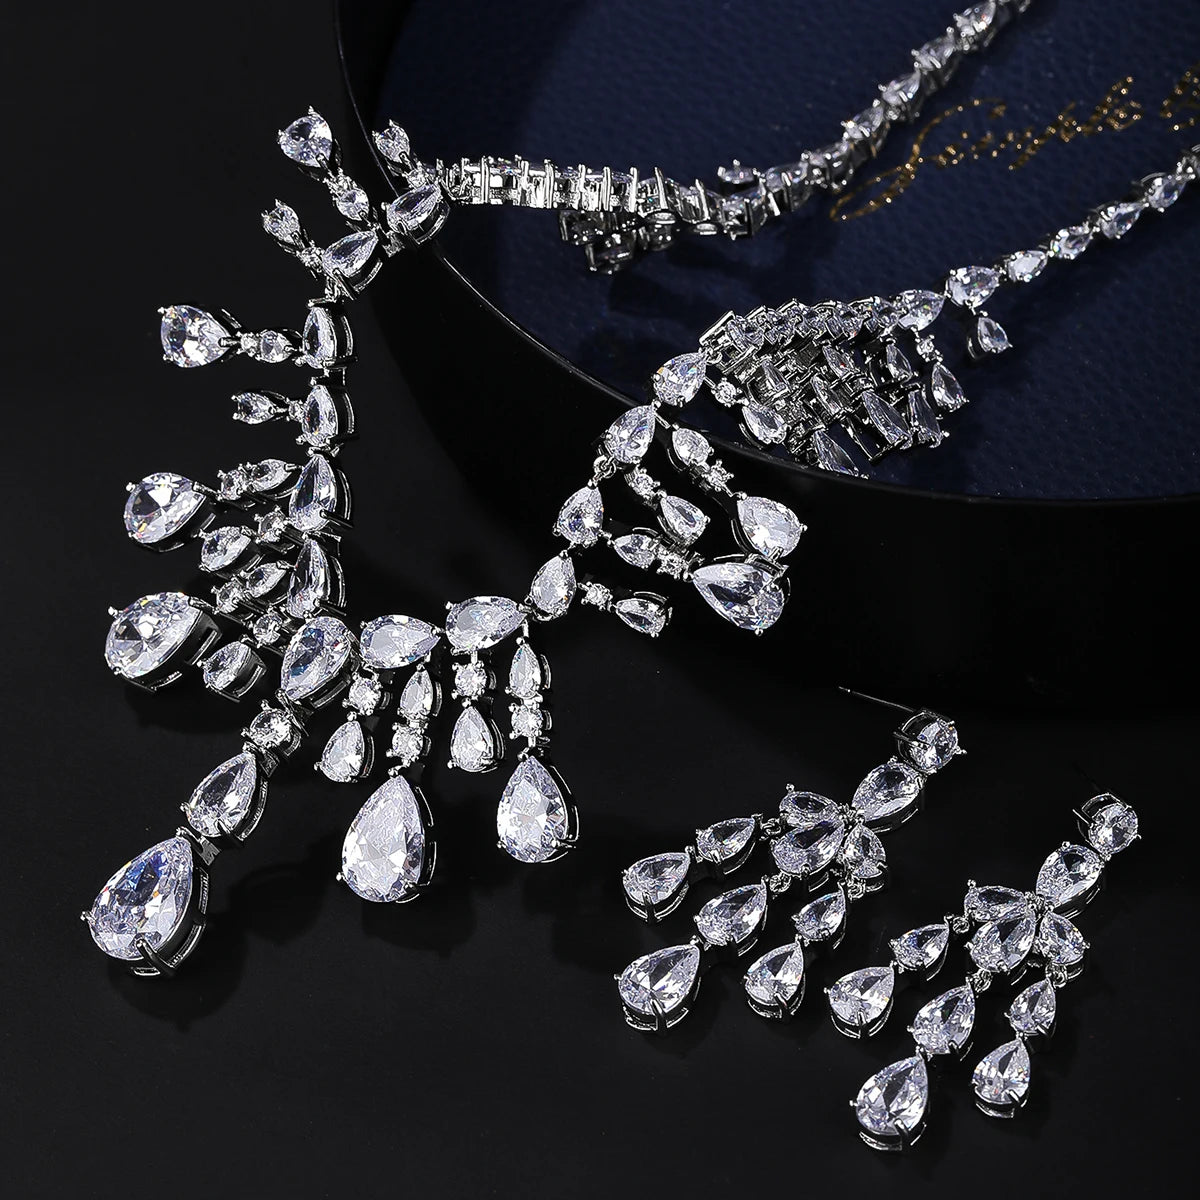 Buy COCIDE Jewelry Set Silver Bride Wedding Crystal Necklace Earrings Bridal  Rhinestone Teardrop Pendant Accessories for Women and Bridesmaids (Set of  3) at Amazon.in